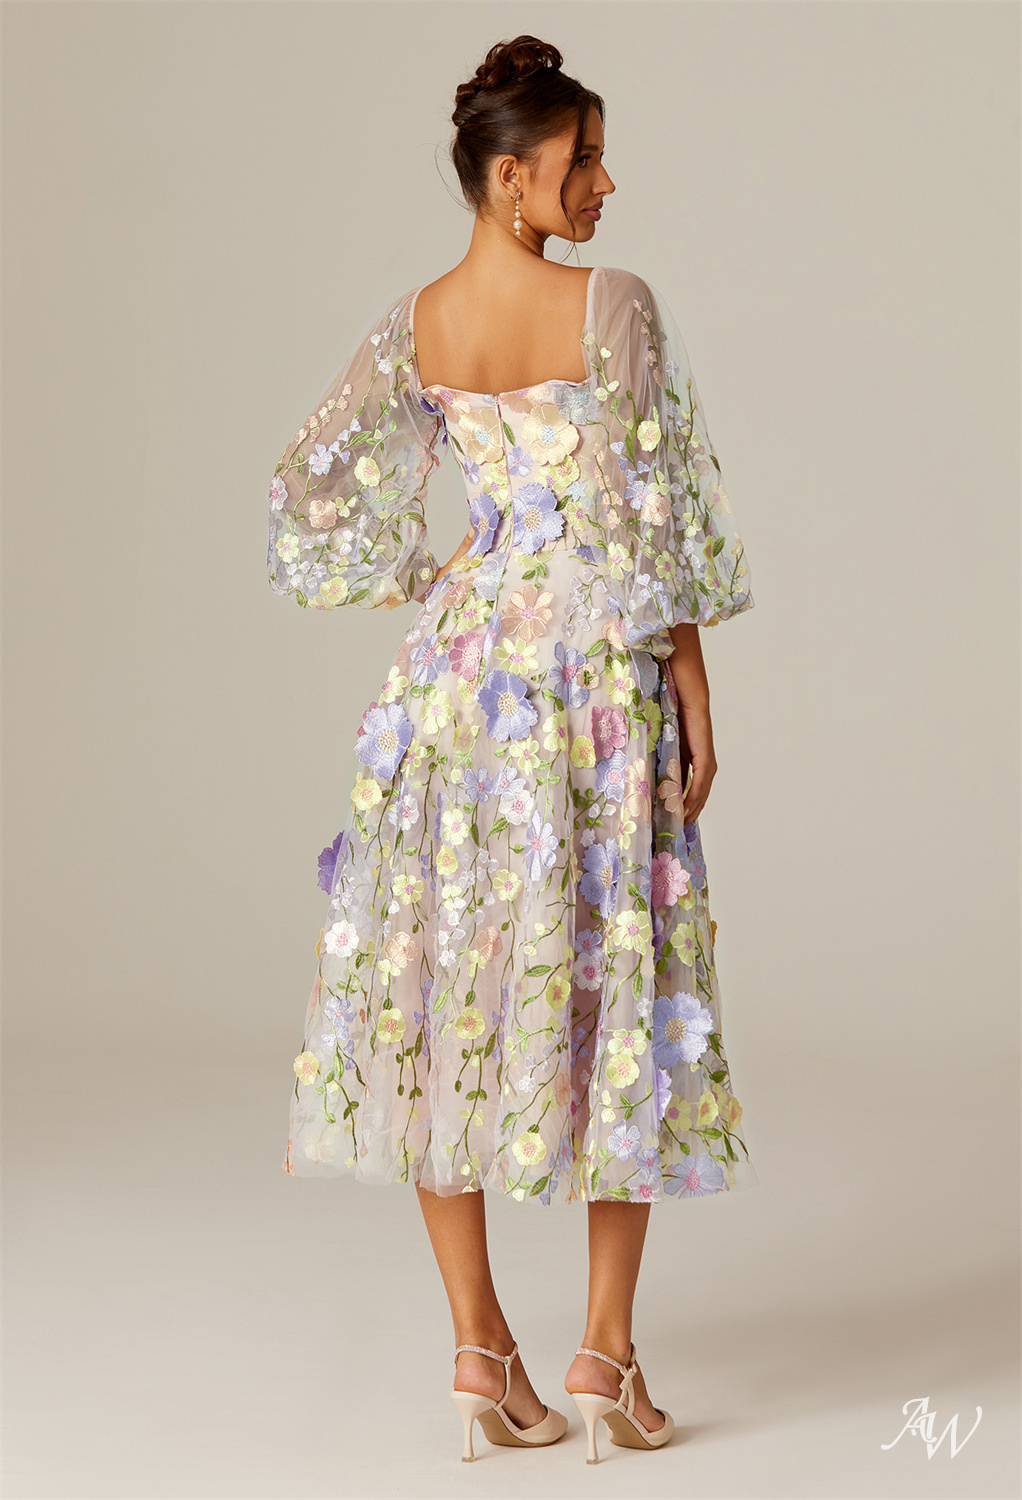 Floral dress by AW Bridal